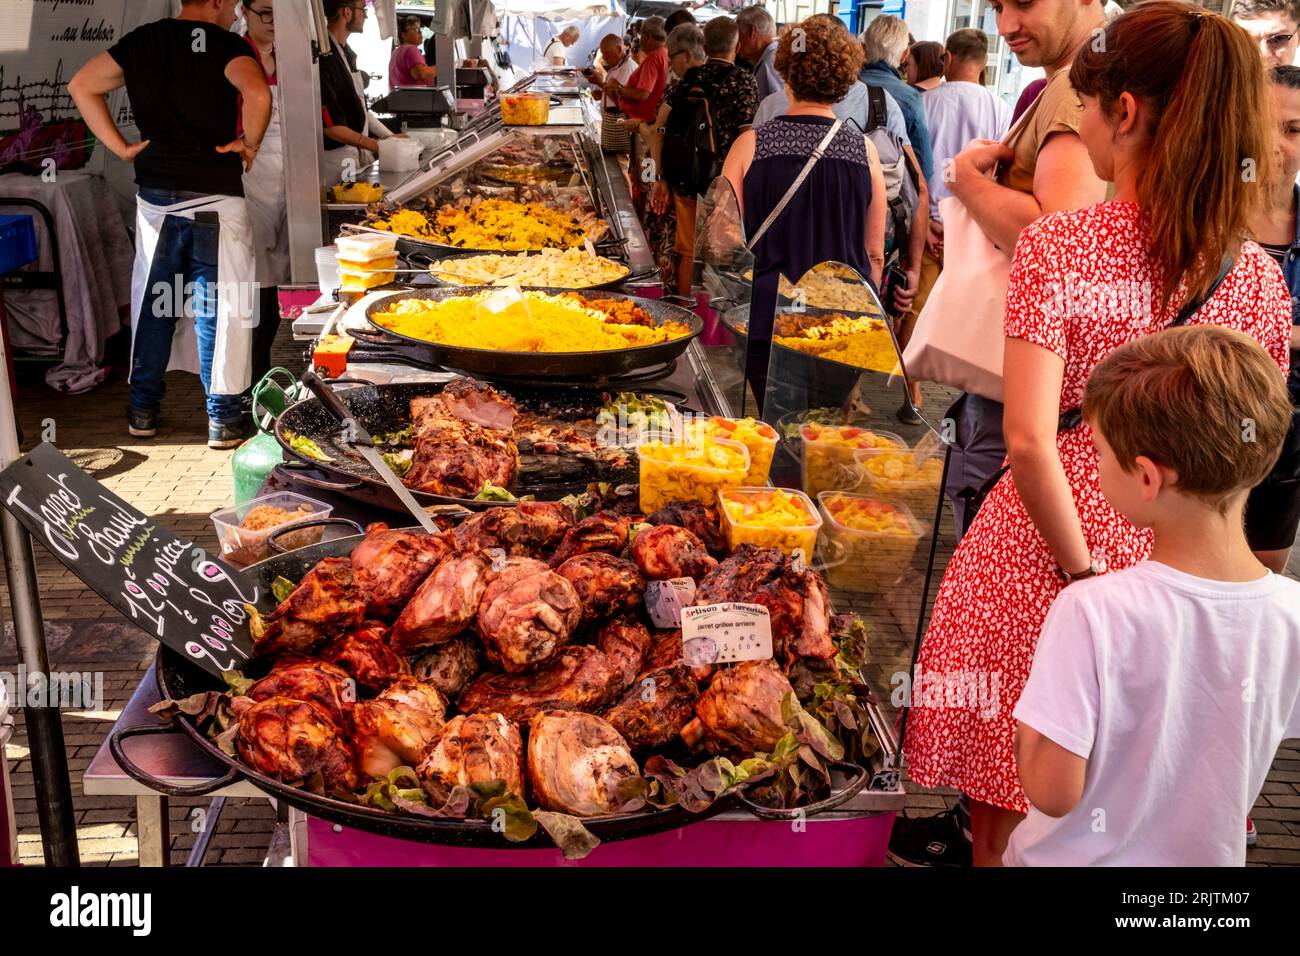 Local People Buying Cooked Meat Products At The Saturday Market In Dieppe, Seine-Maritime Department, France. Stock Photo